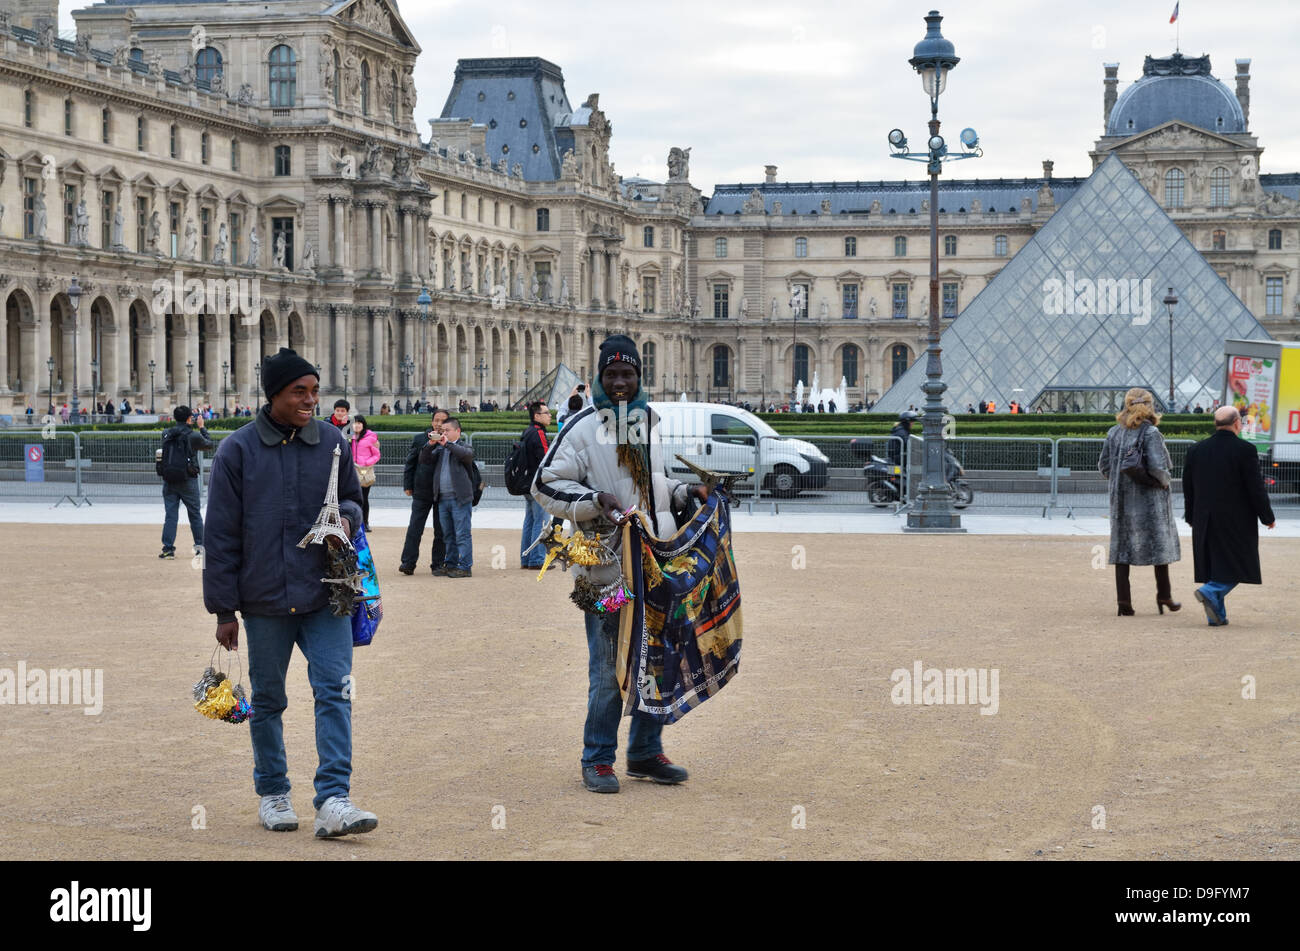 Street traders with goods for sale to tourists outside Musee du Louvre in Paris, France - Jan 2012 Stock Photo